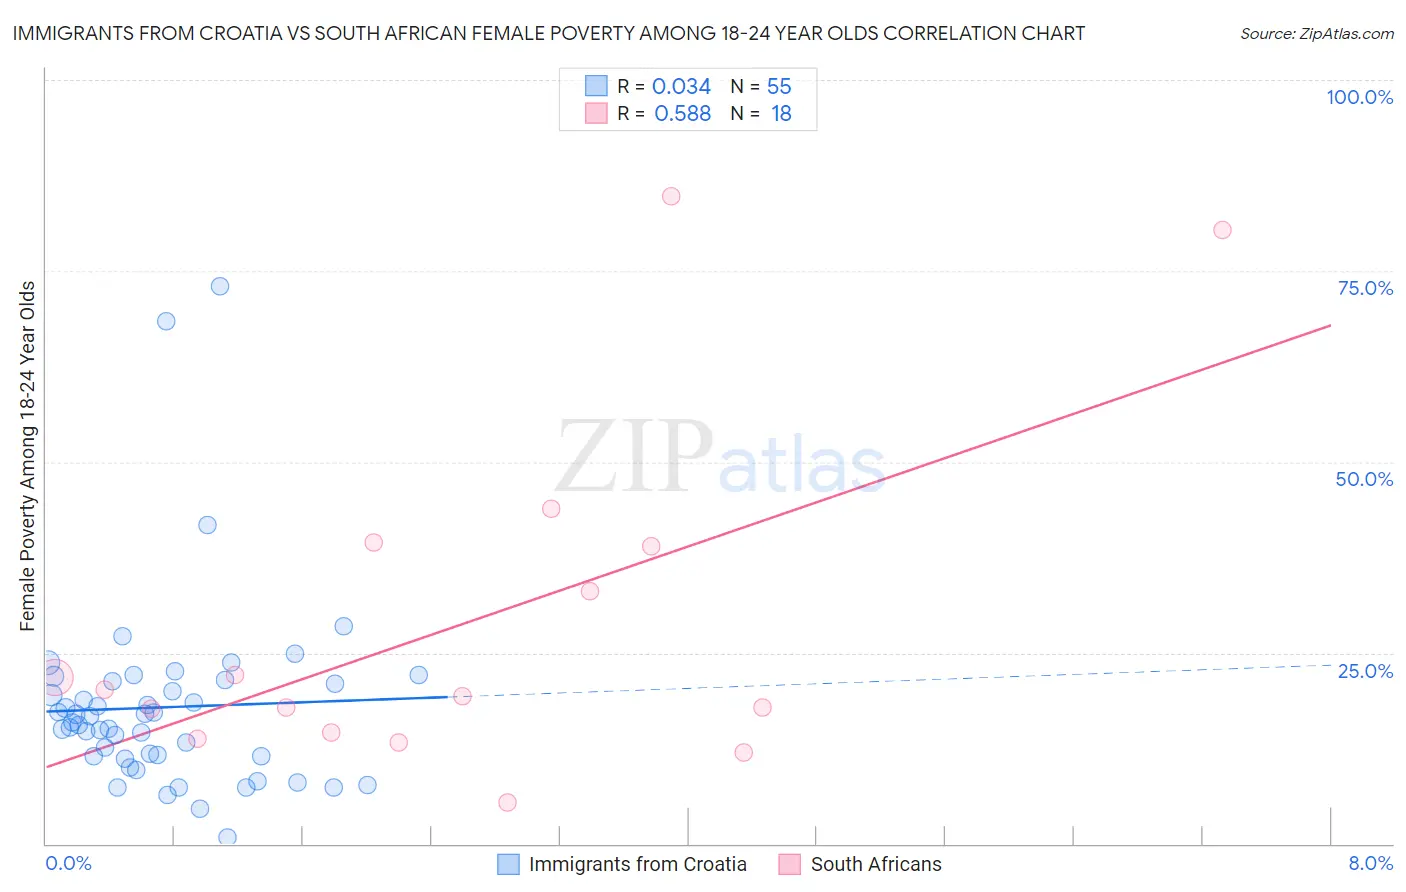 Immigrants from Croatia vs South African Female Poverty Among 18-24 Year Olds